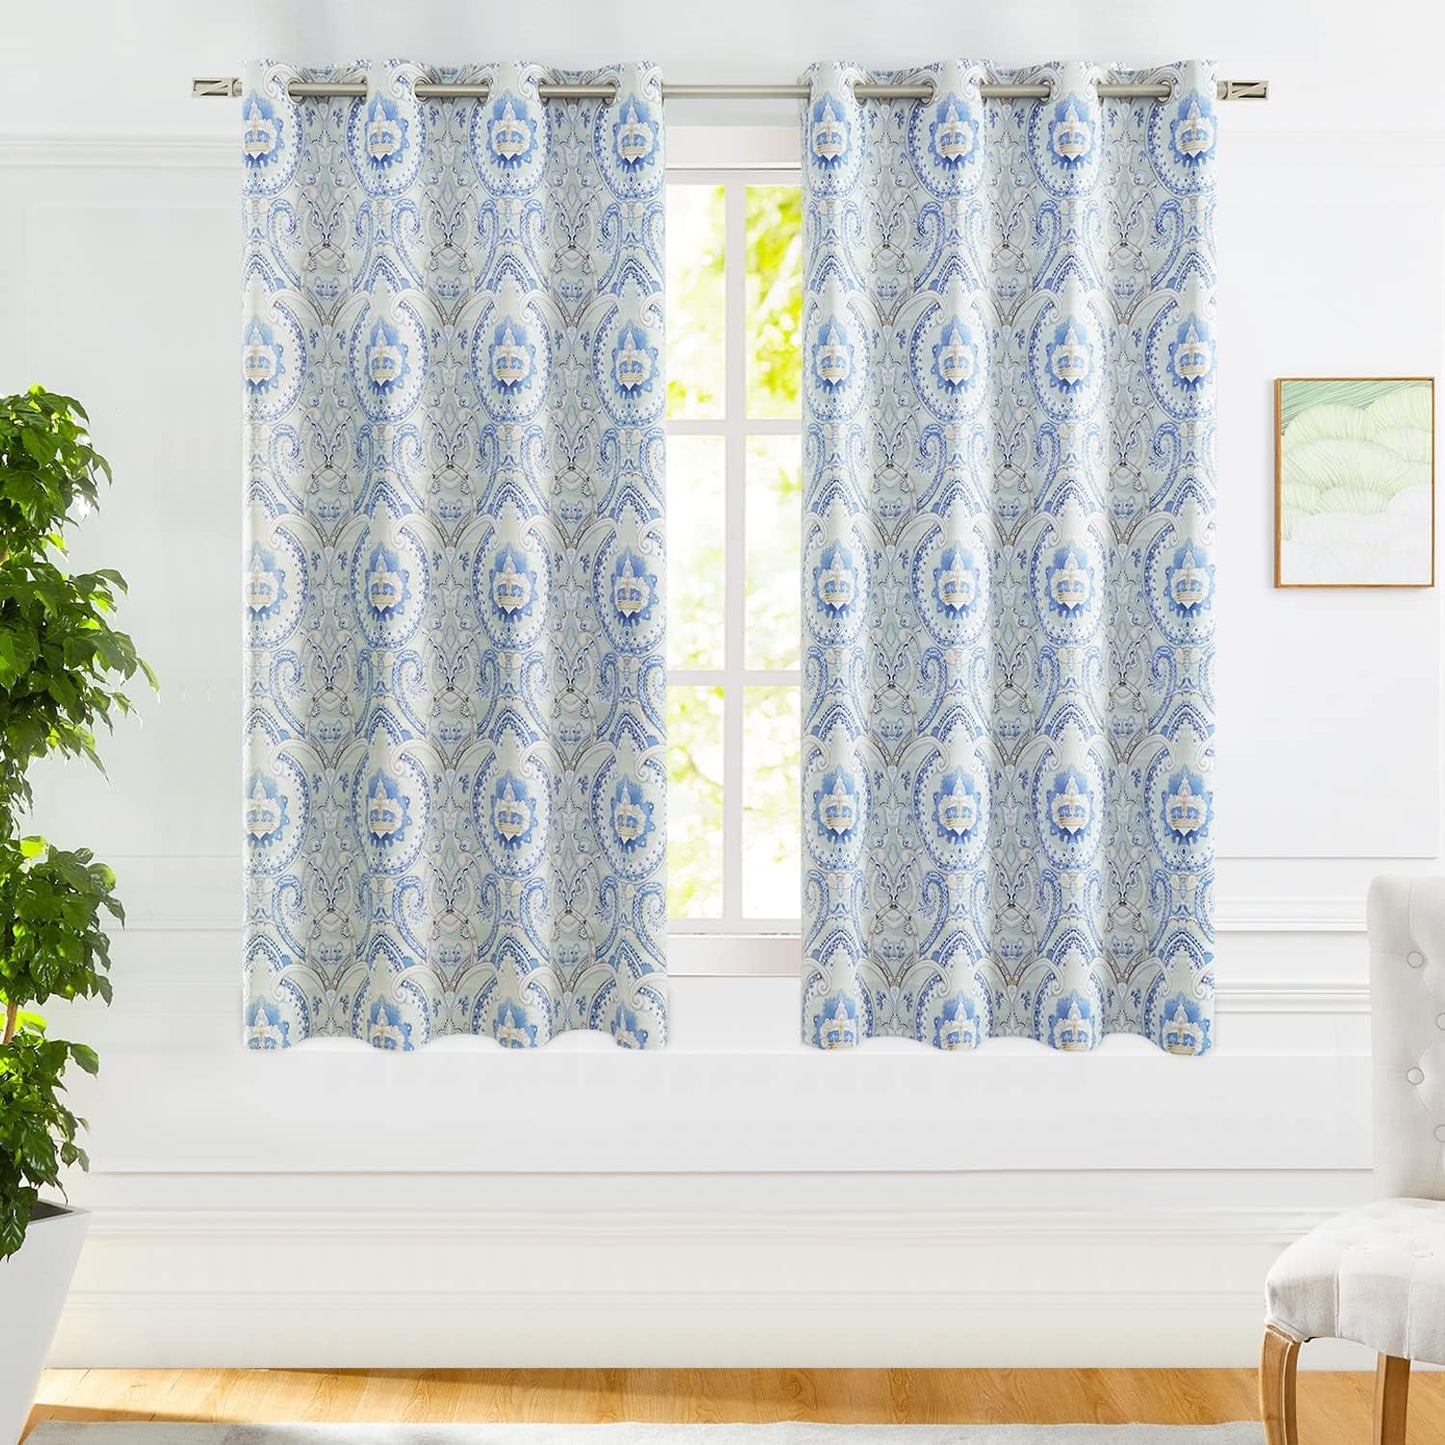 White Grey Blackout Curtains for Bedroom 84 Inch Length Floral Printed Living Room Curtain Panels for Farmhouse Décor Blossom Thermal Energy Efficient Light Blocking Window Curtain 50"W 2Pcs  Fmfunctex Blue/ Grey 50"W X 63"L 2Pcs 